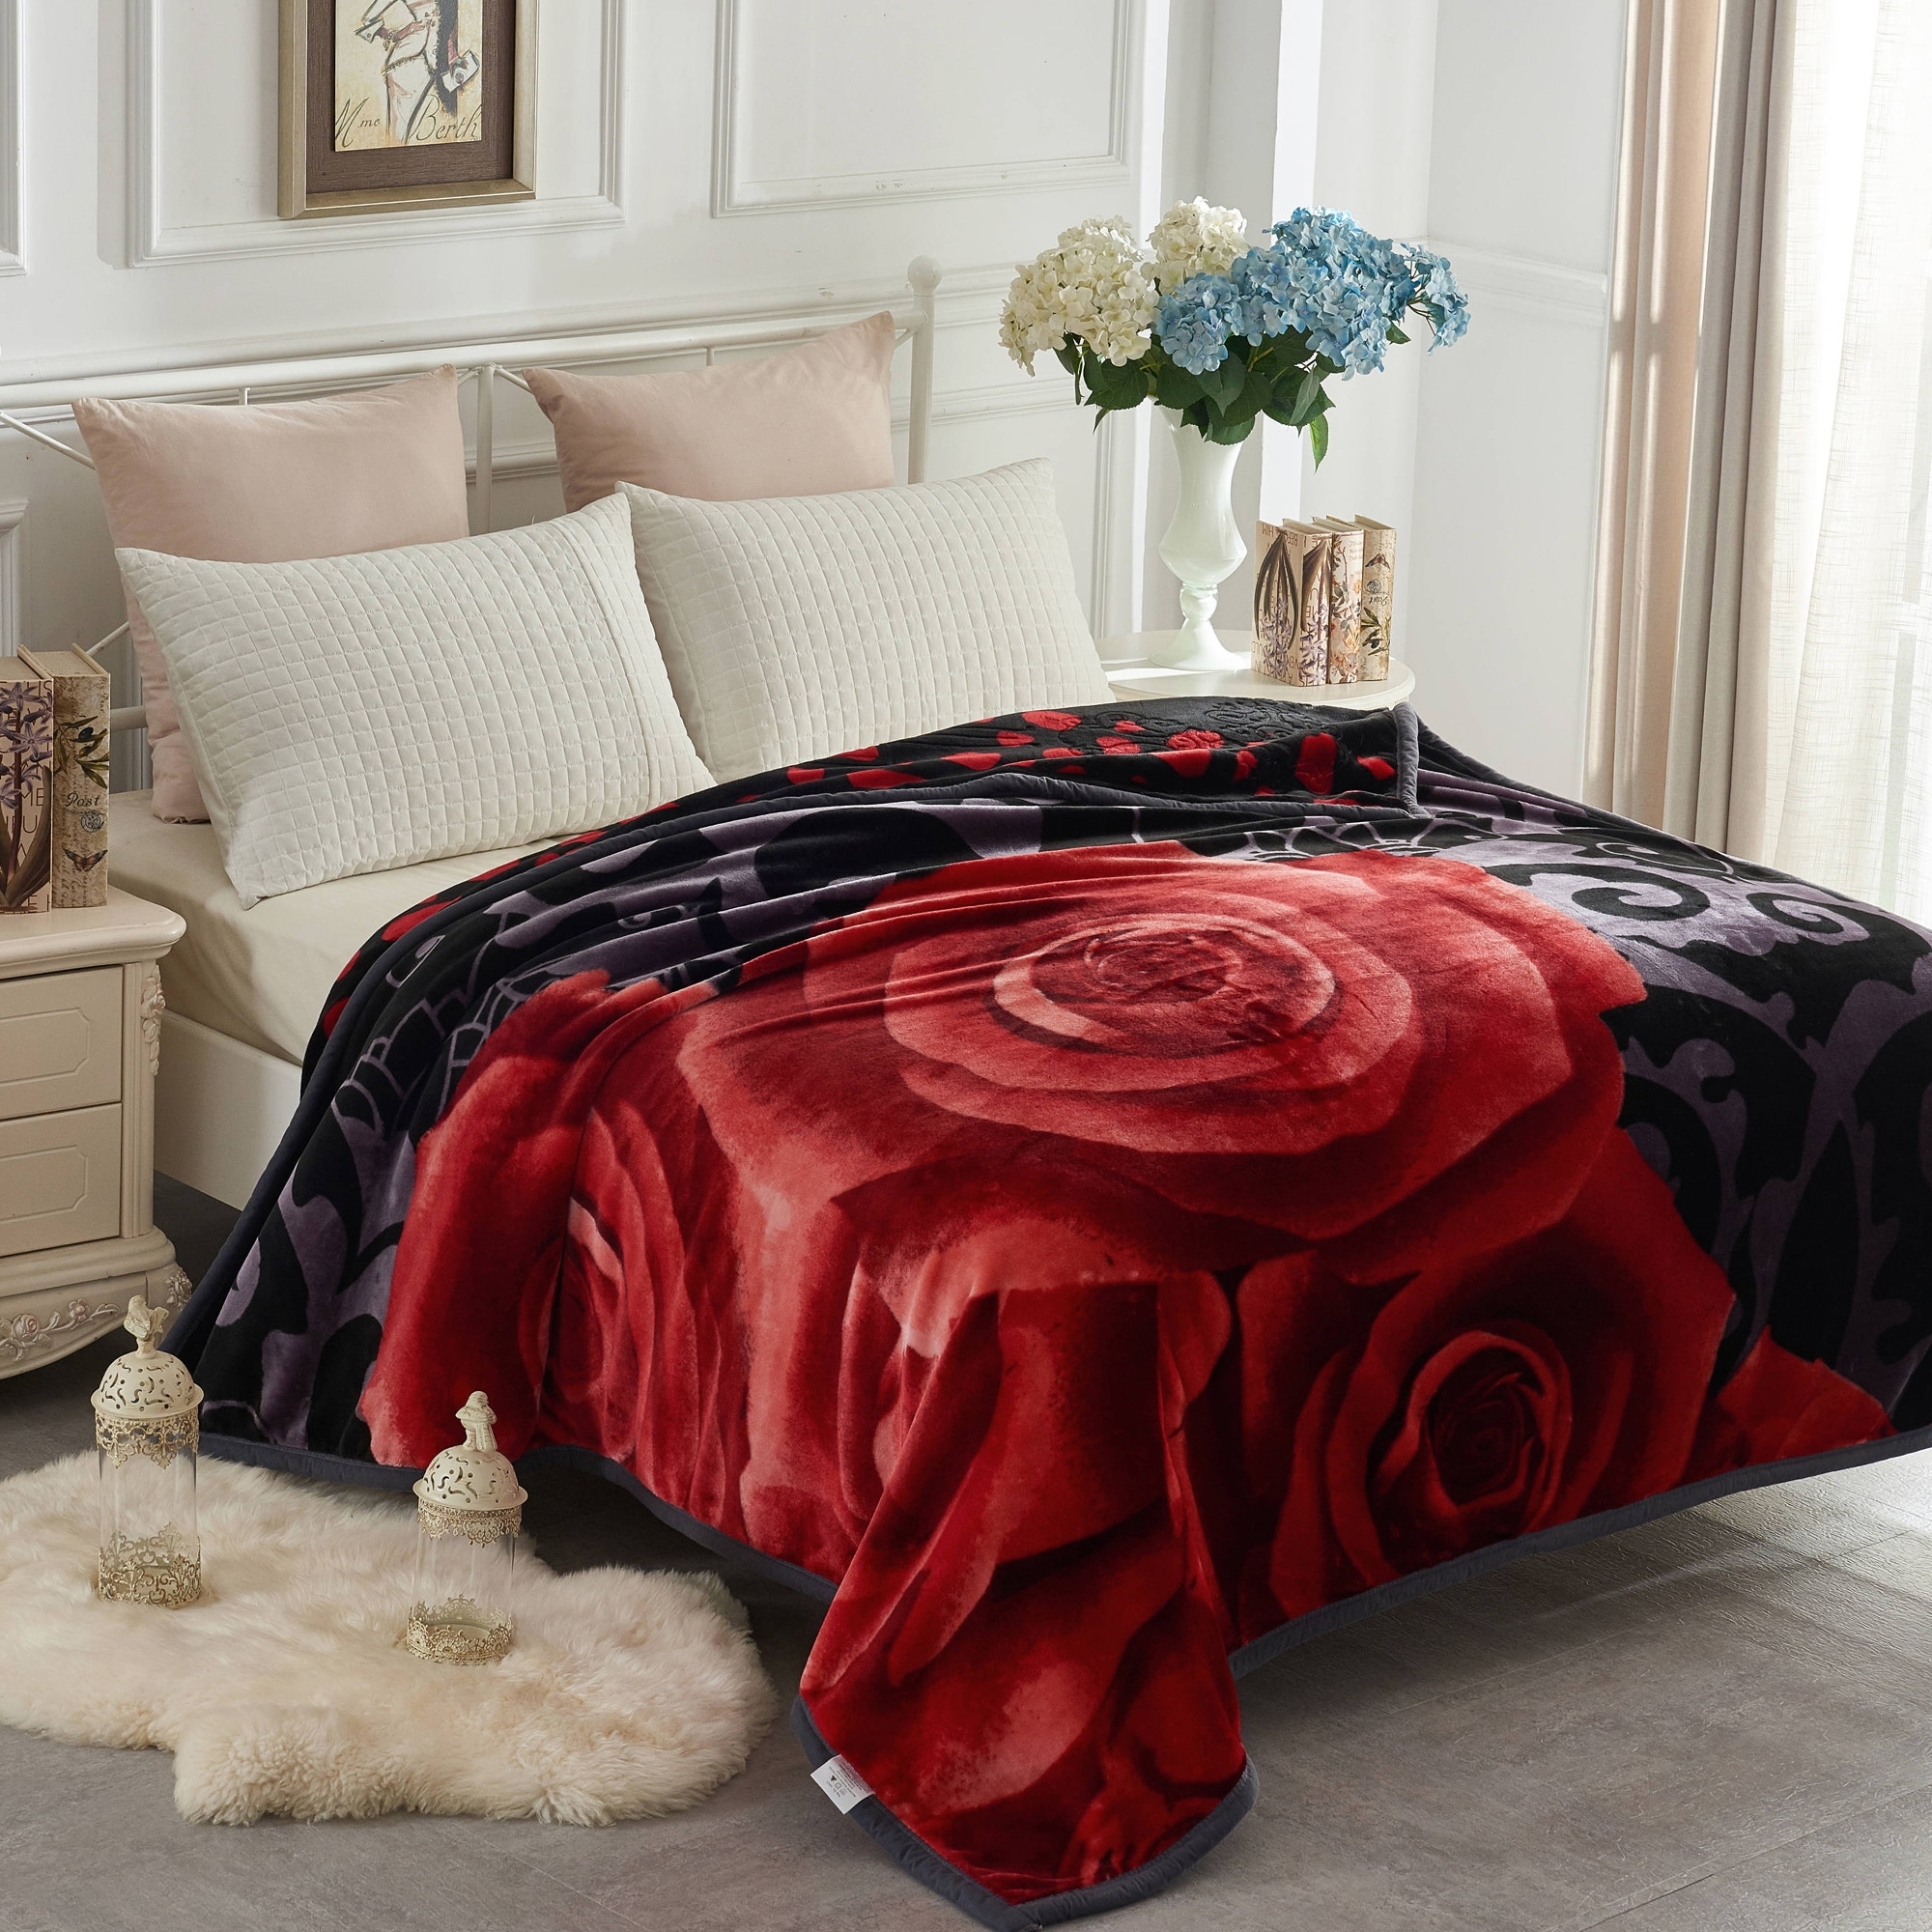 Plush King Size Heavy Korean Style Mink Blanket - 2 Ply ANIMAL Printed  Raschel Bed Blanket at Rs 1200/piece, Mink Blankets in Panipat